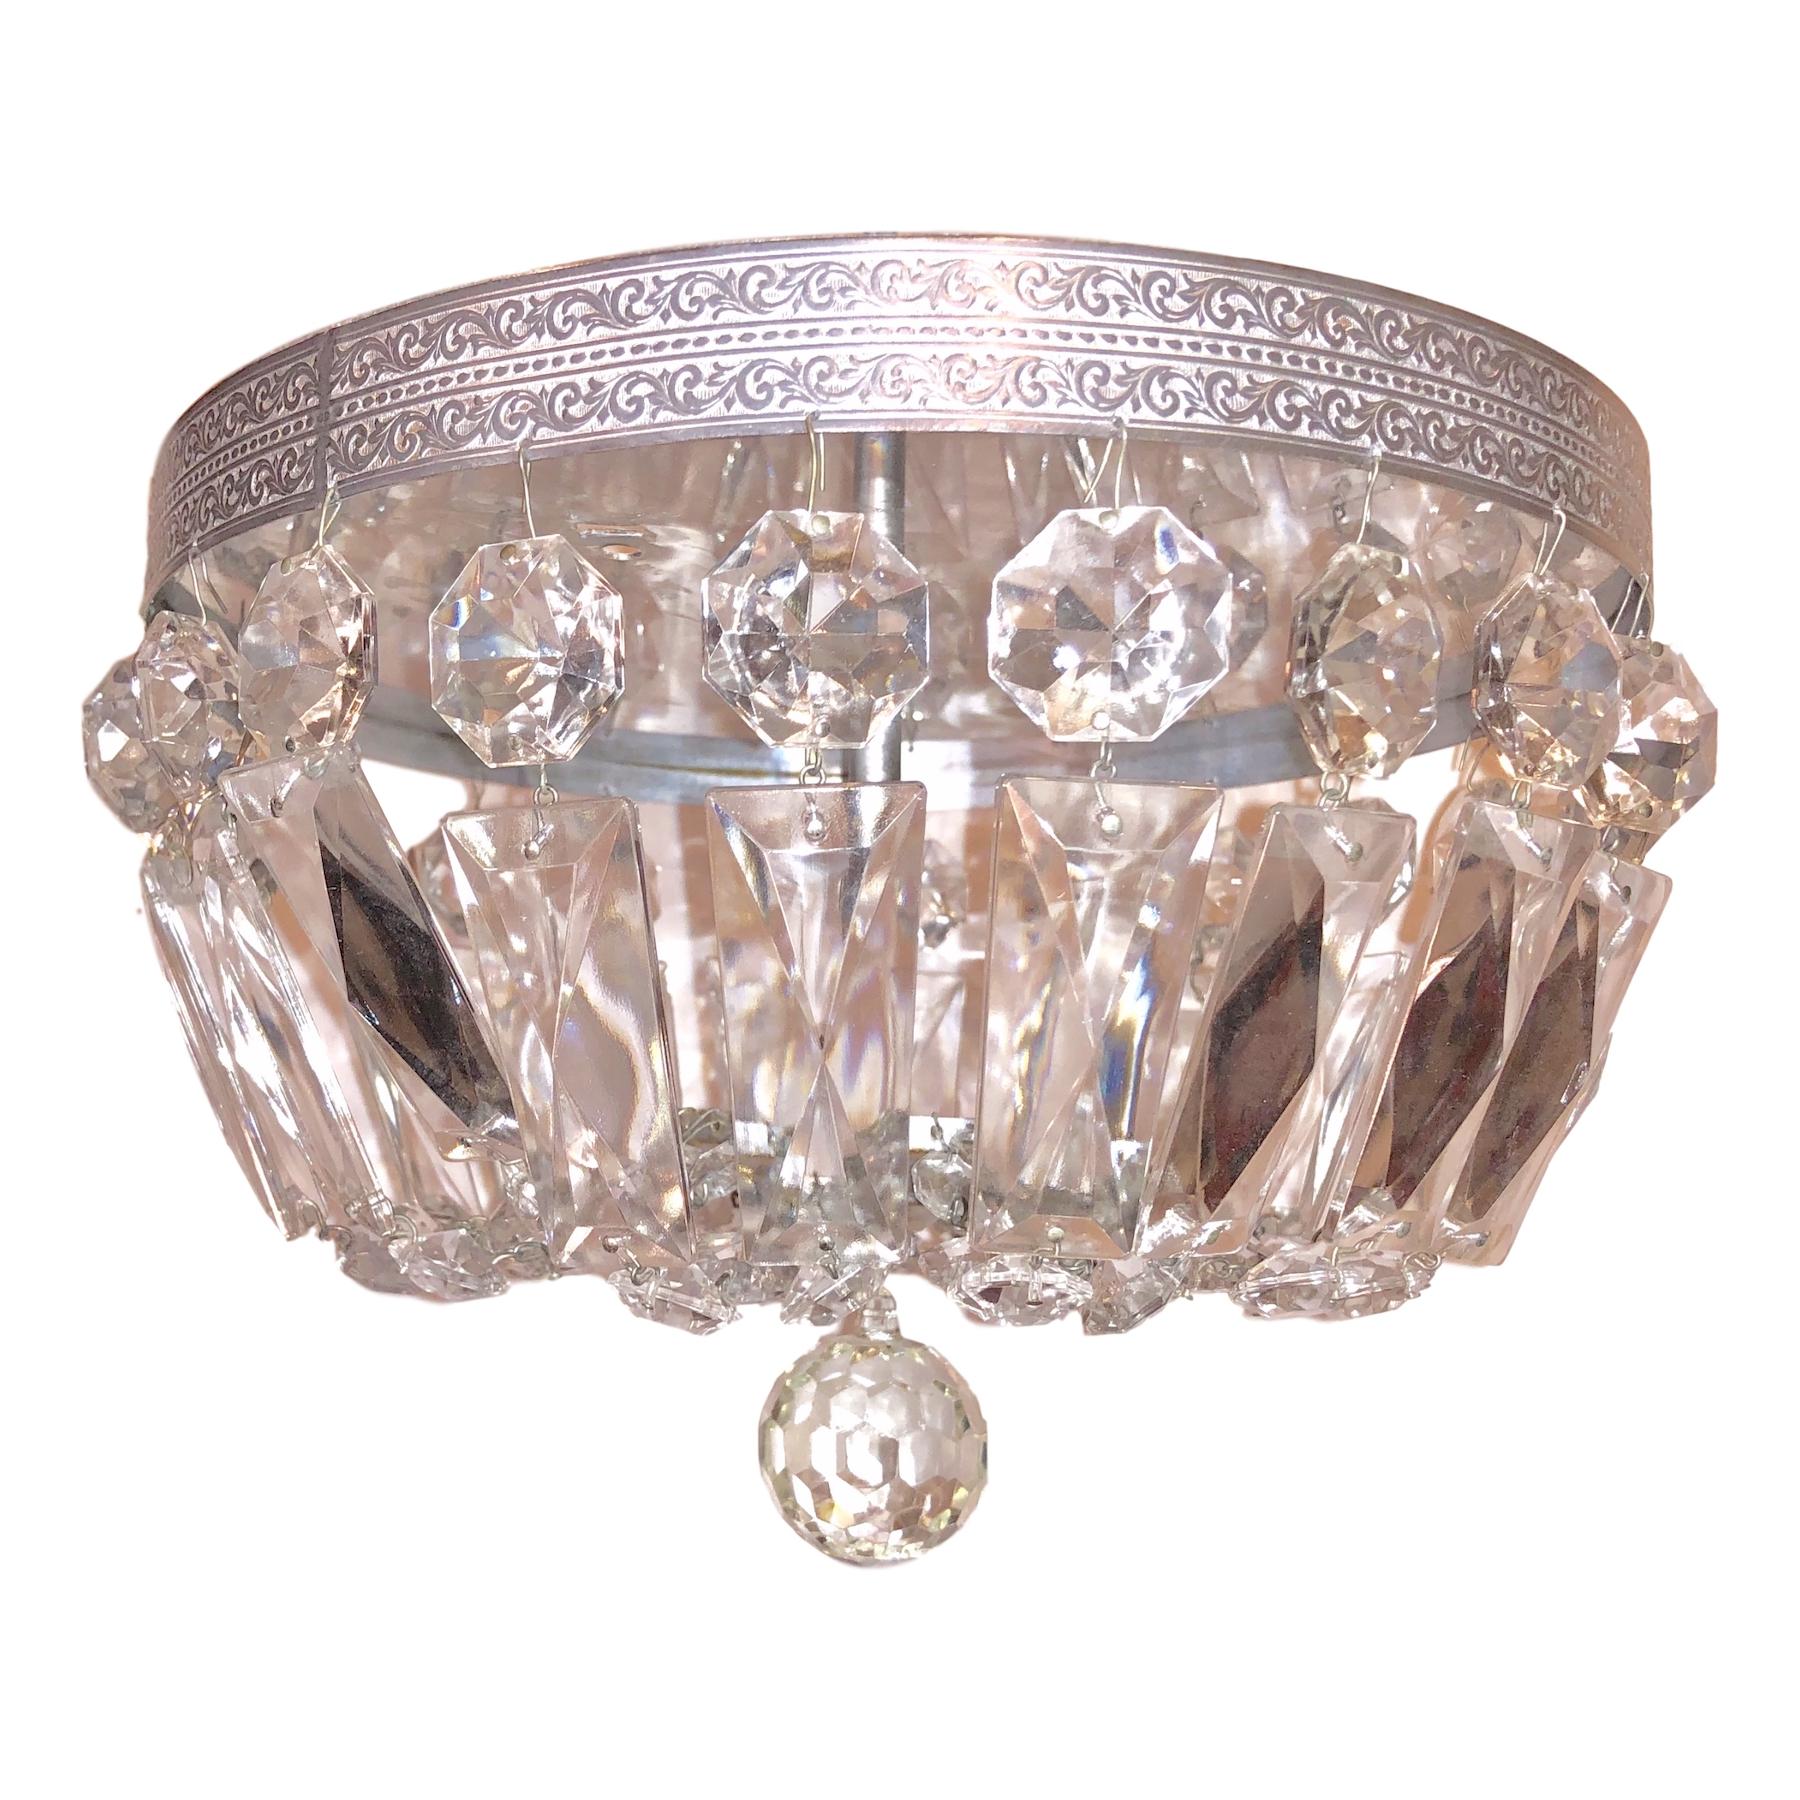 A set of three circa 1950s French crystal flush-mounted silver plated fixtures.

Measurements:
Drop 8